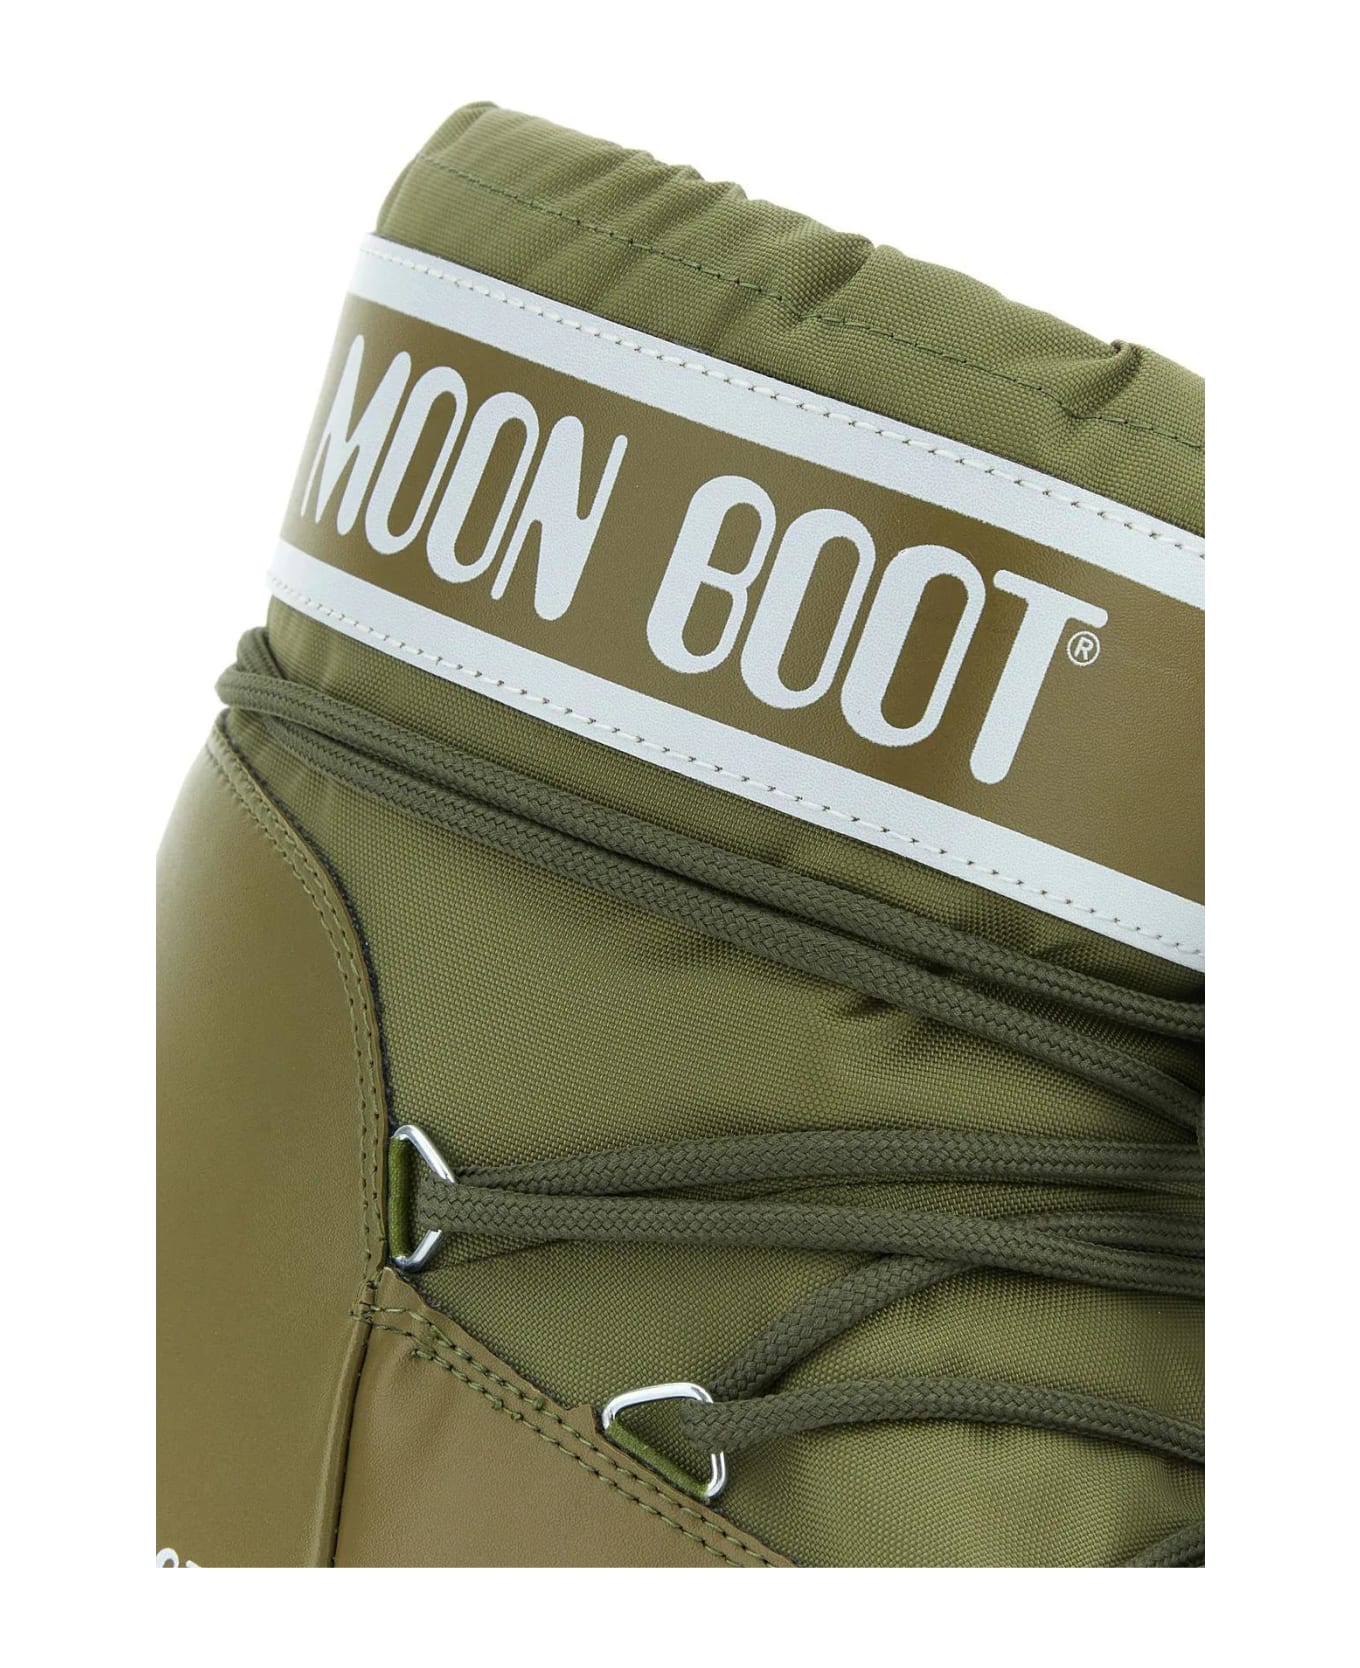 Moon Boot Olive Green Nylon Icon Low Ankle Boots - Verde